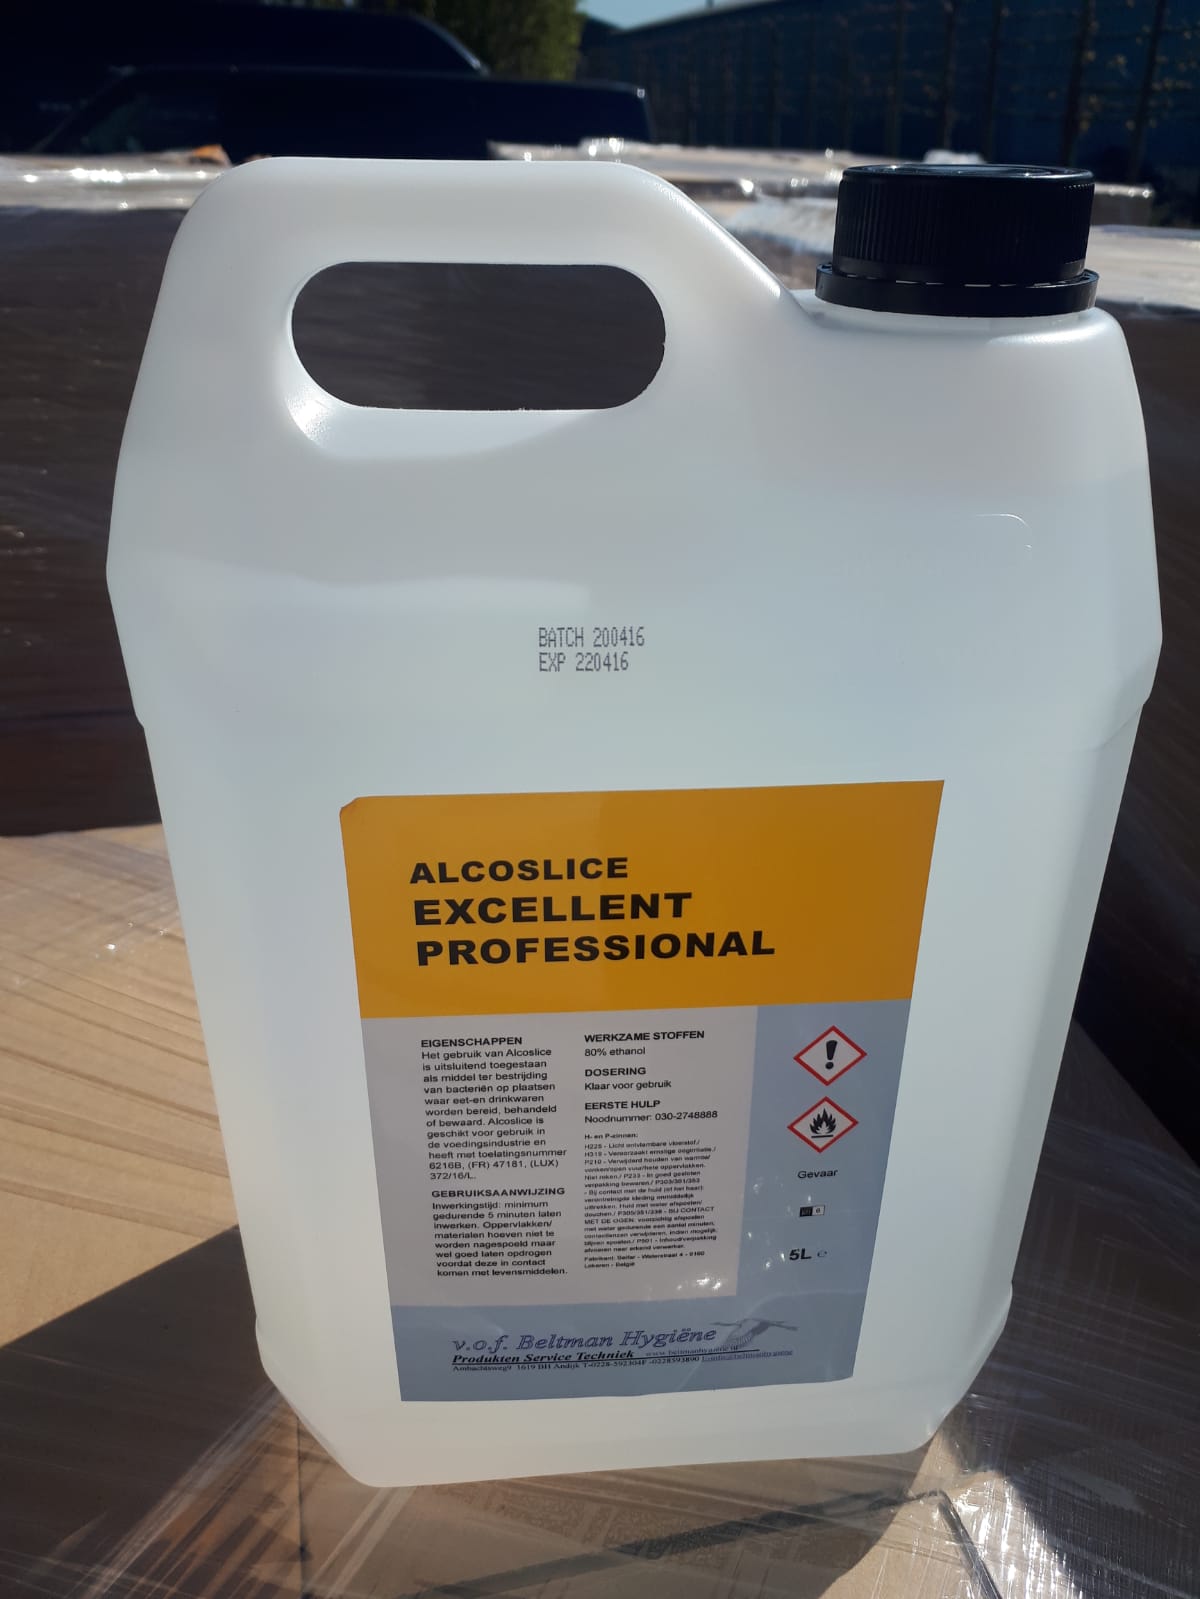 Excellent Alcolice professional: 80% ethanol Image